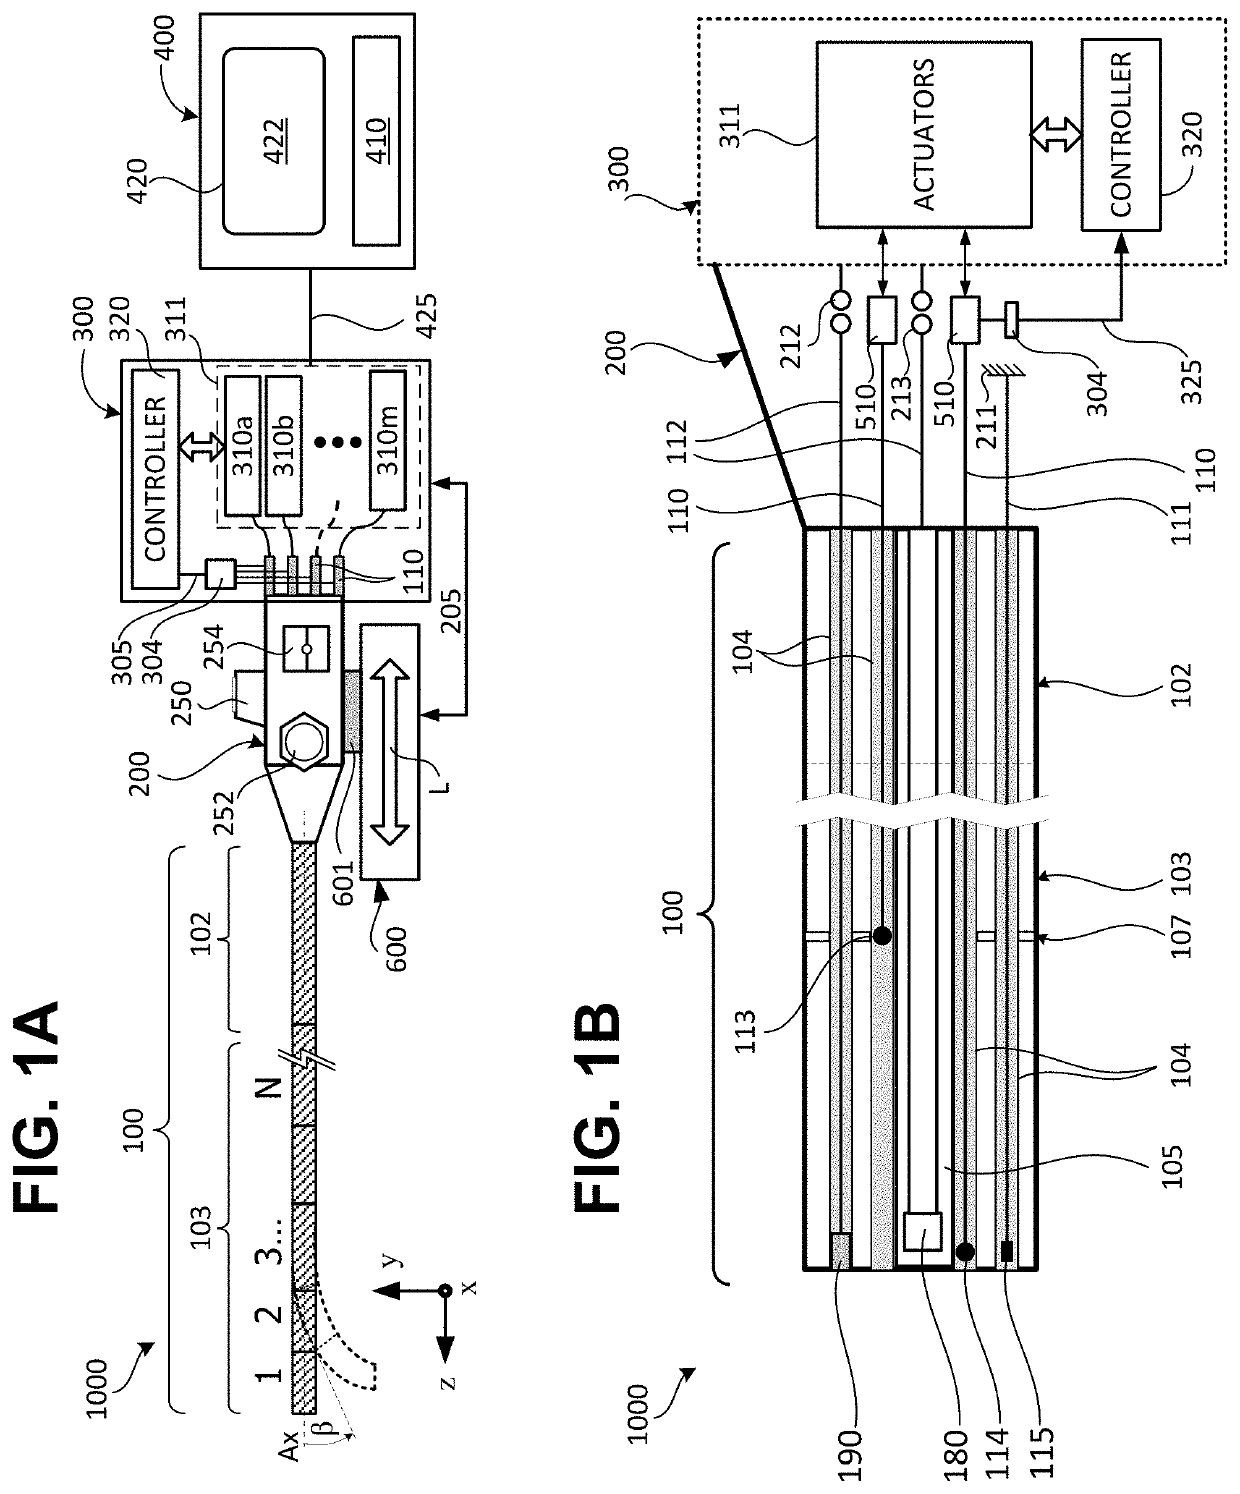 Magnetic connector for steerable medical device